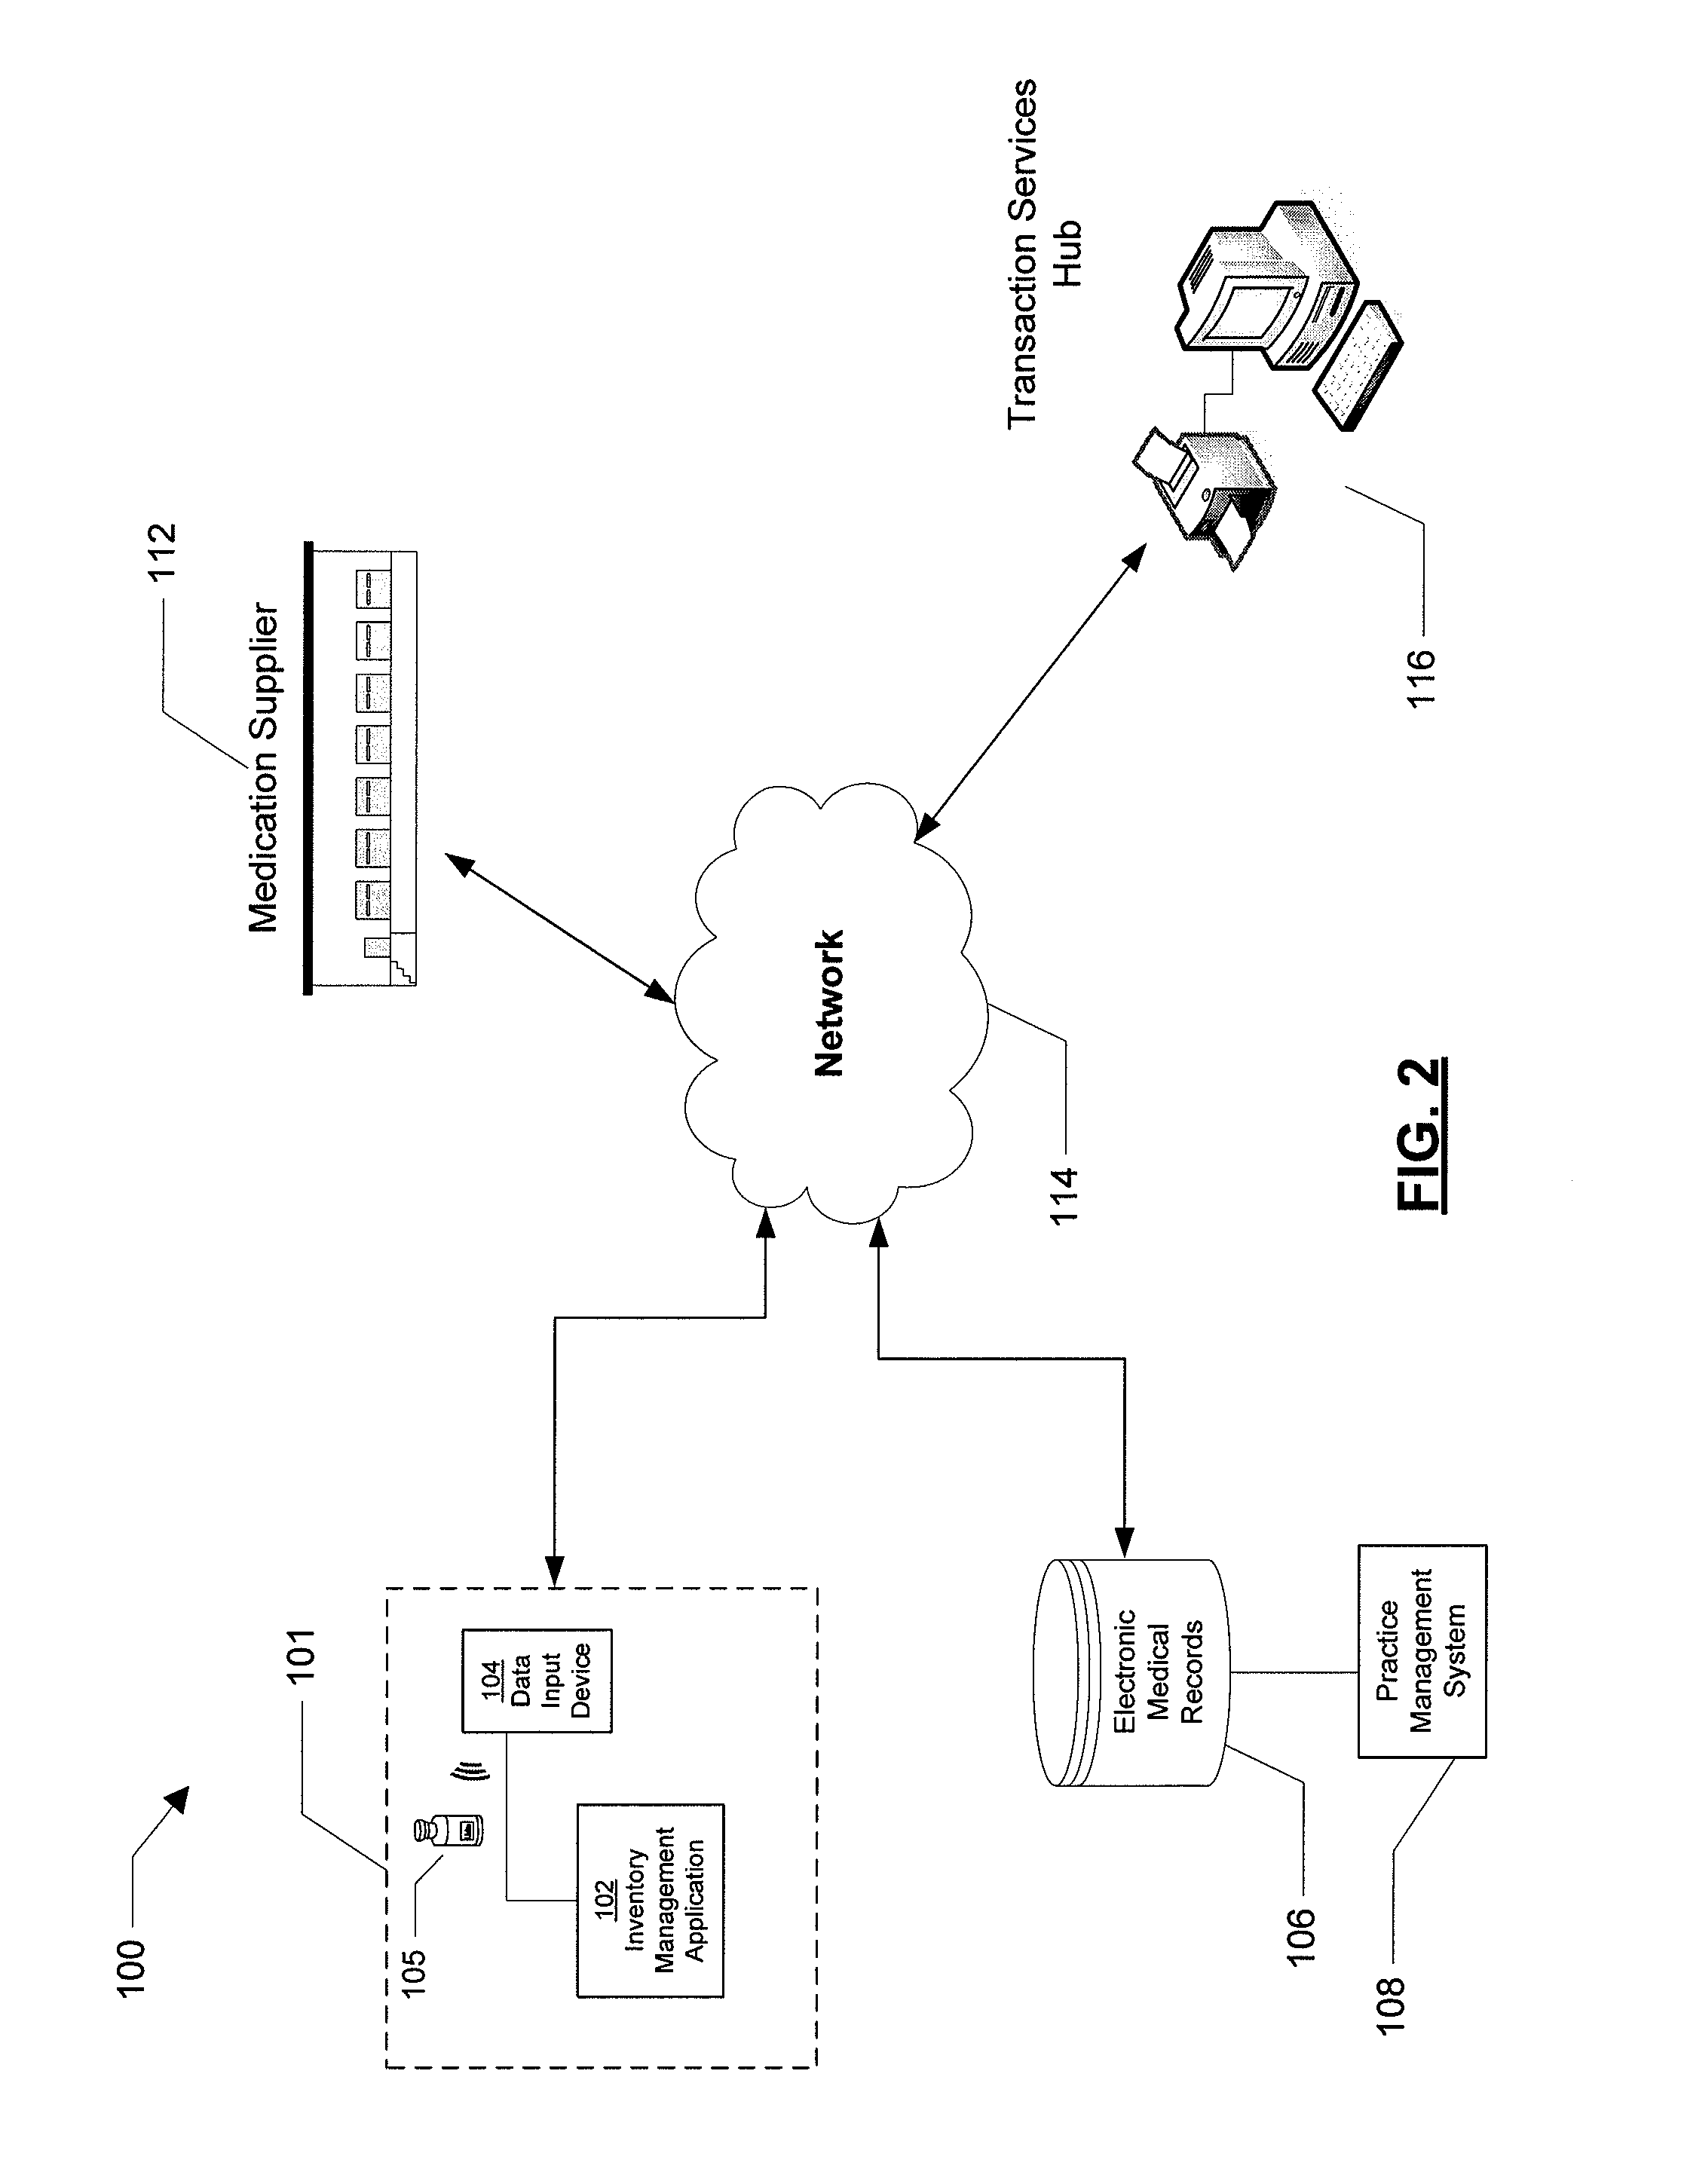 Inventory Management System For A Medical Service Provider